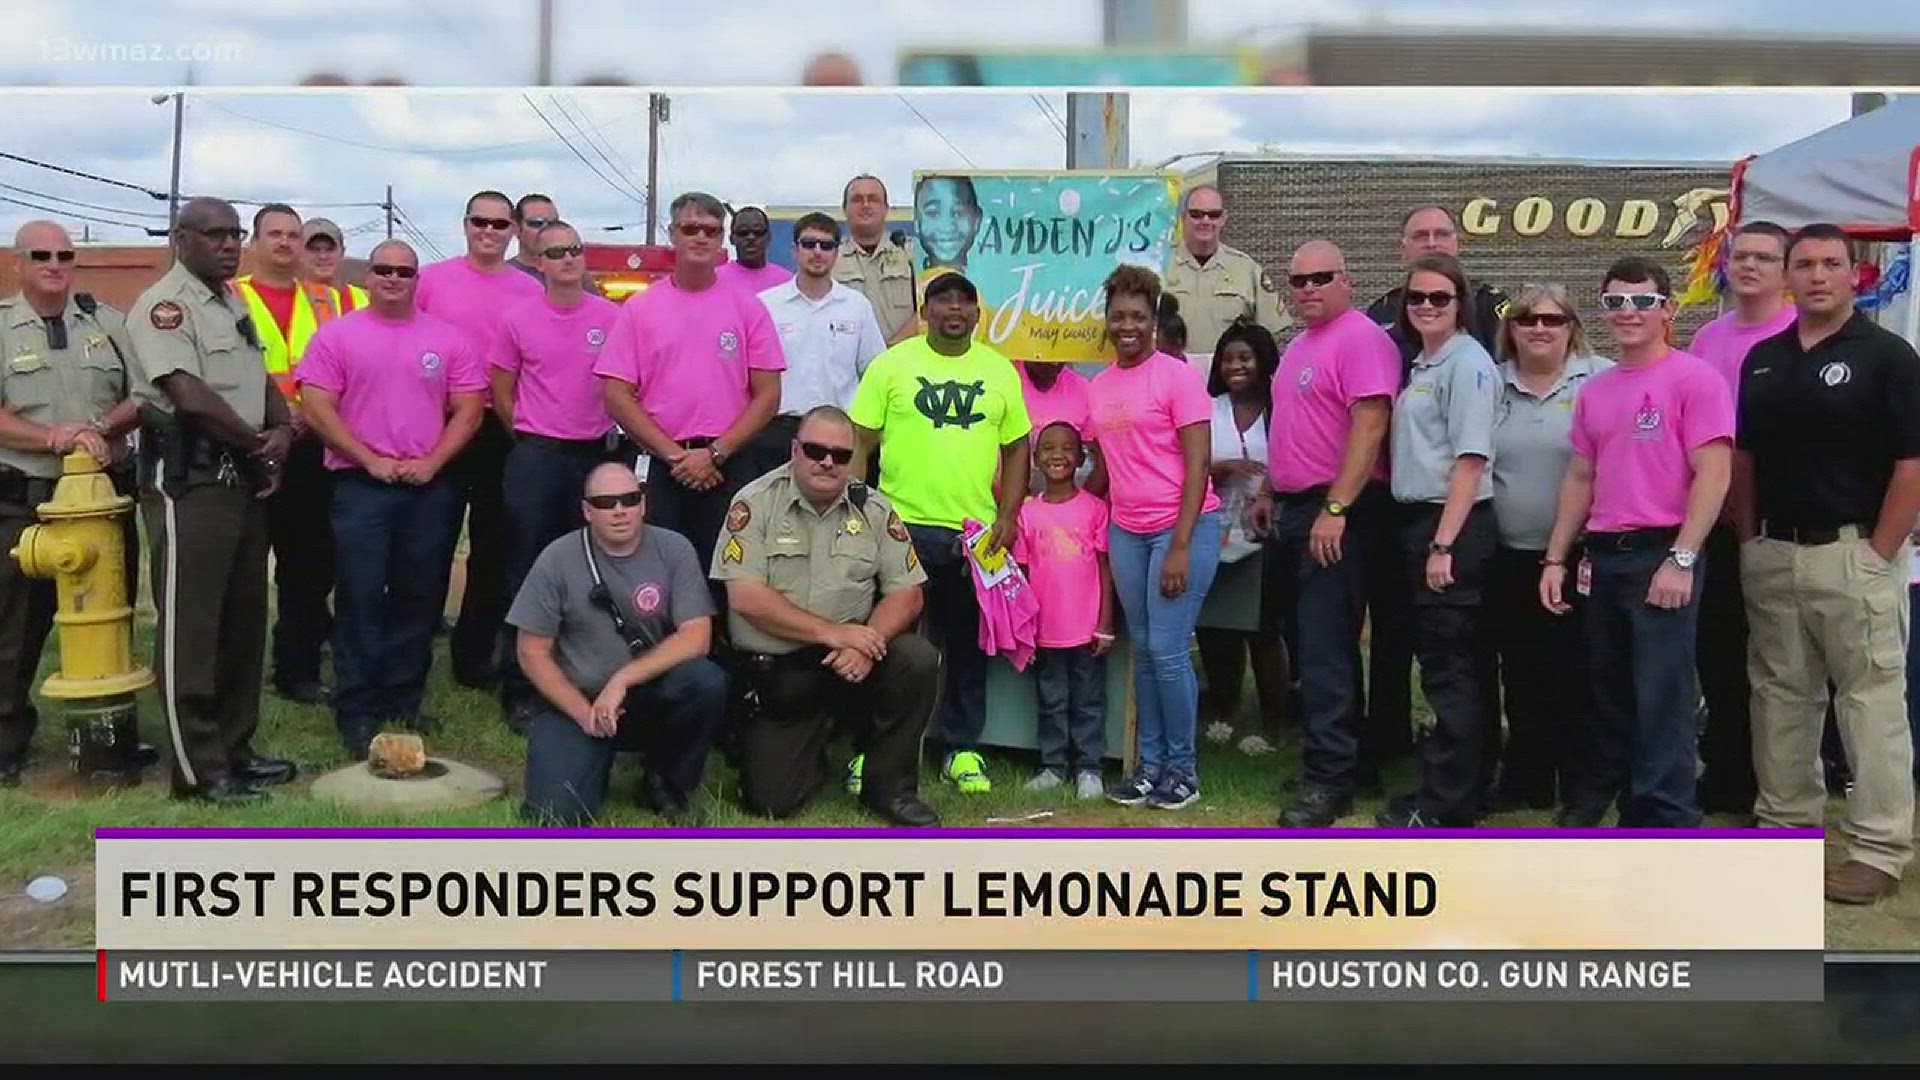 First responders support lemonade stand